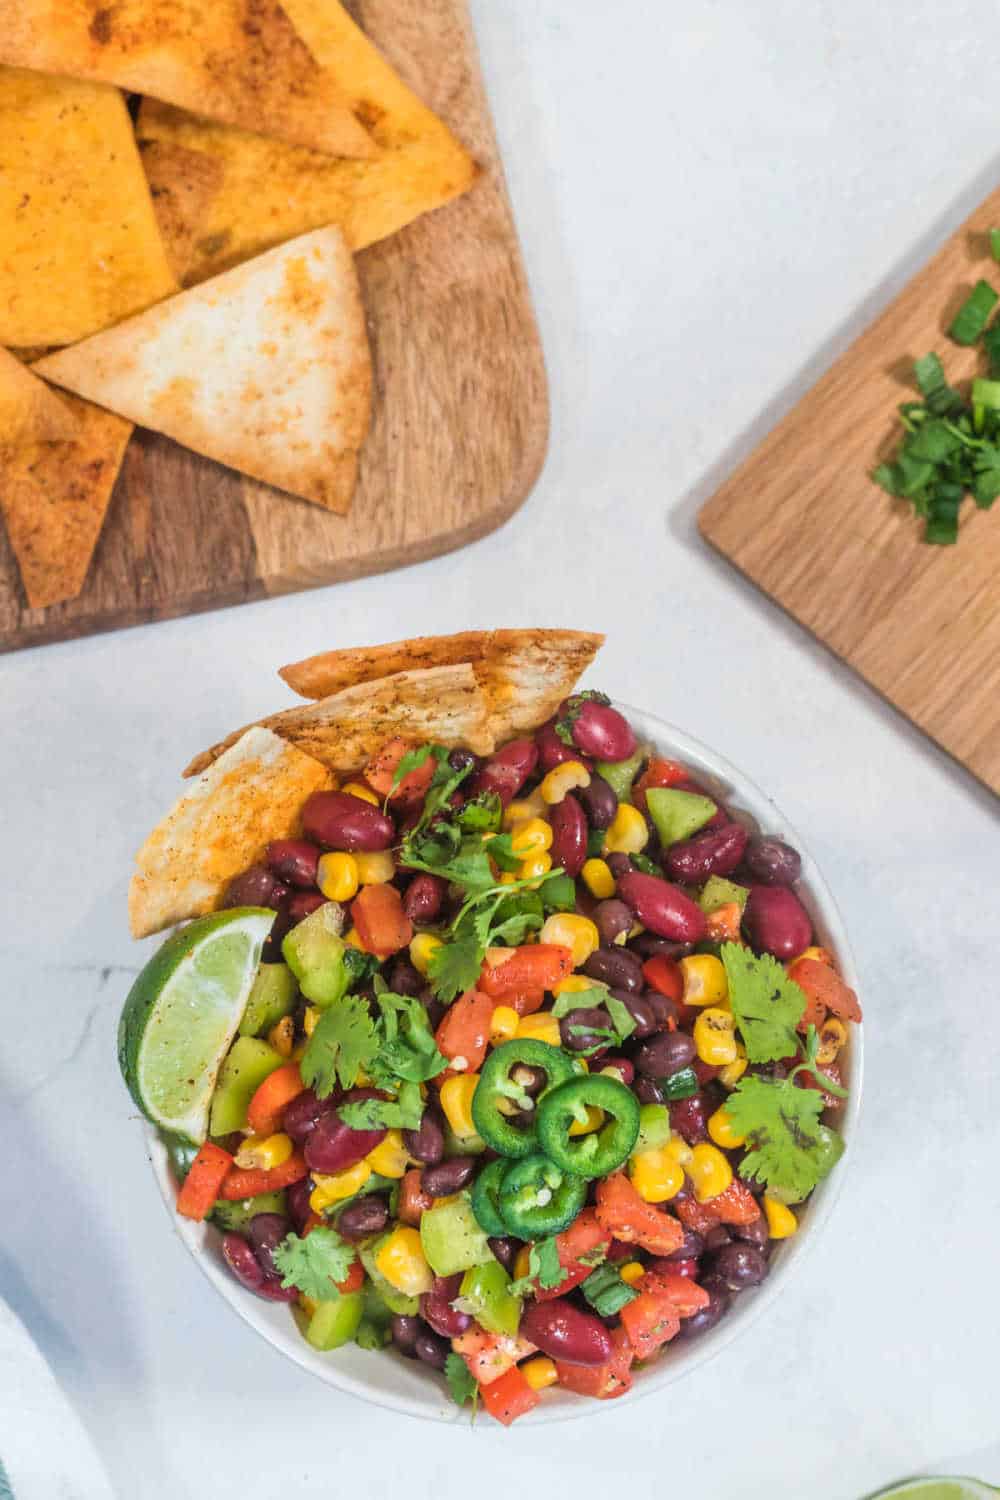 A bowl of Cowboy Caviar with tortilla chips.